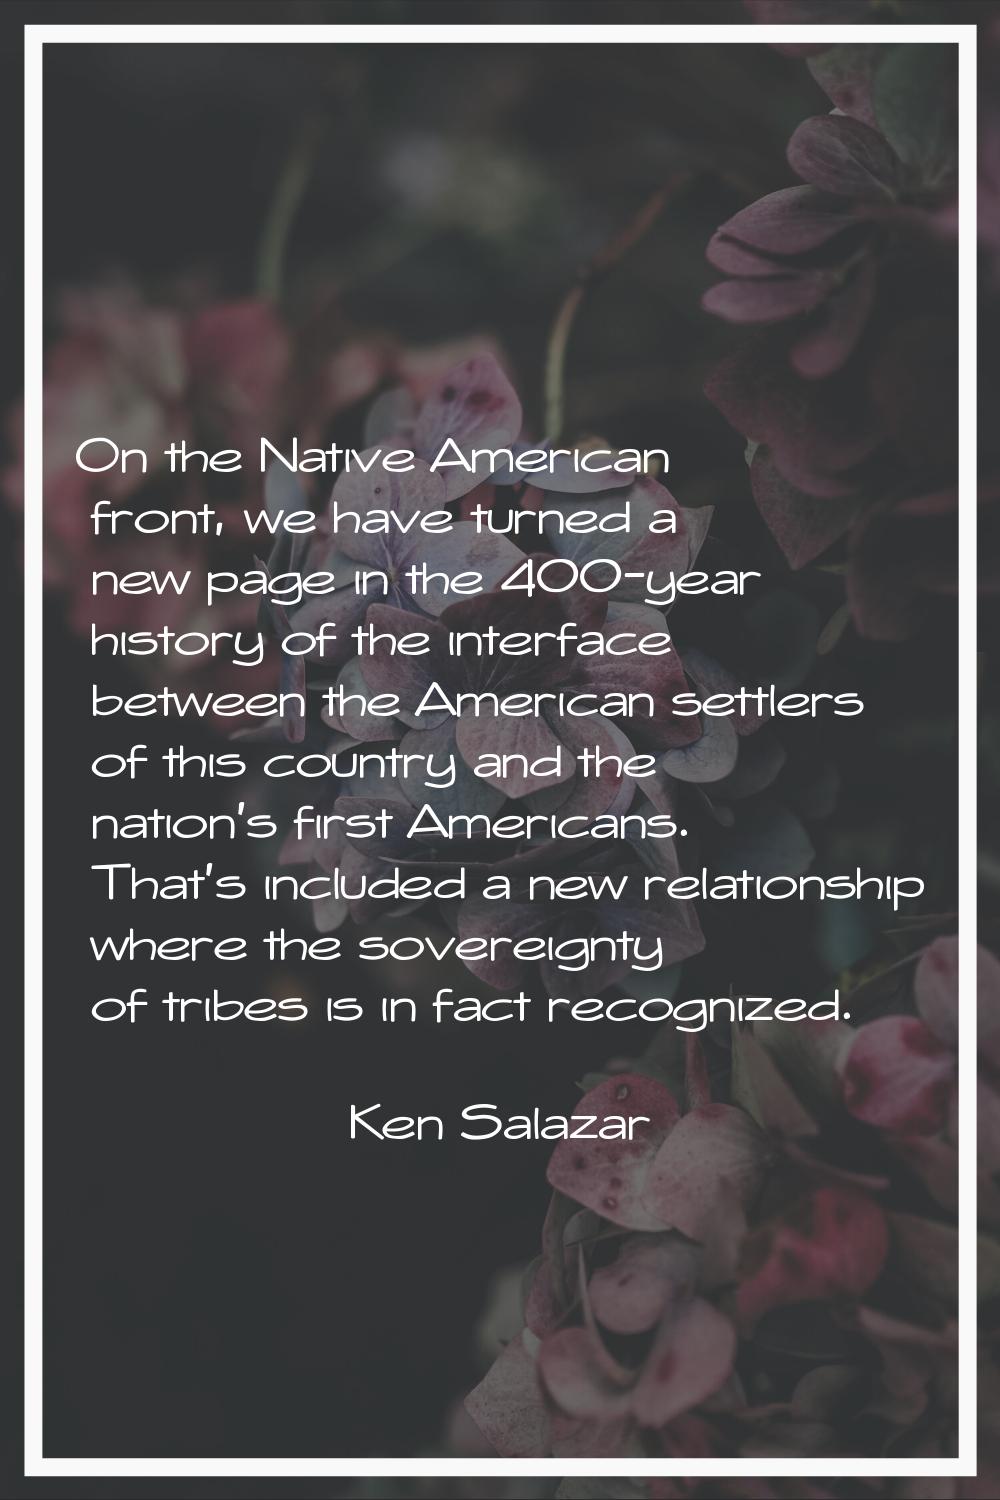 On the Native American front, we have turned a new page in the 400-year history of the interface be